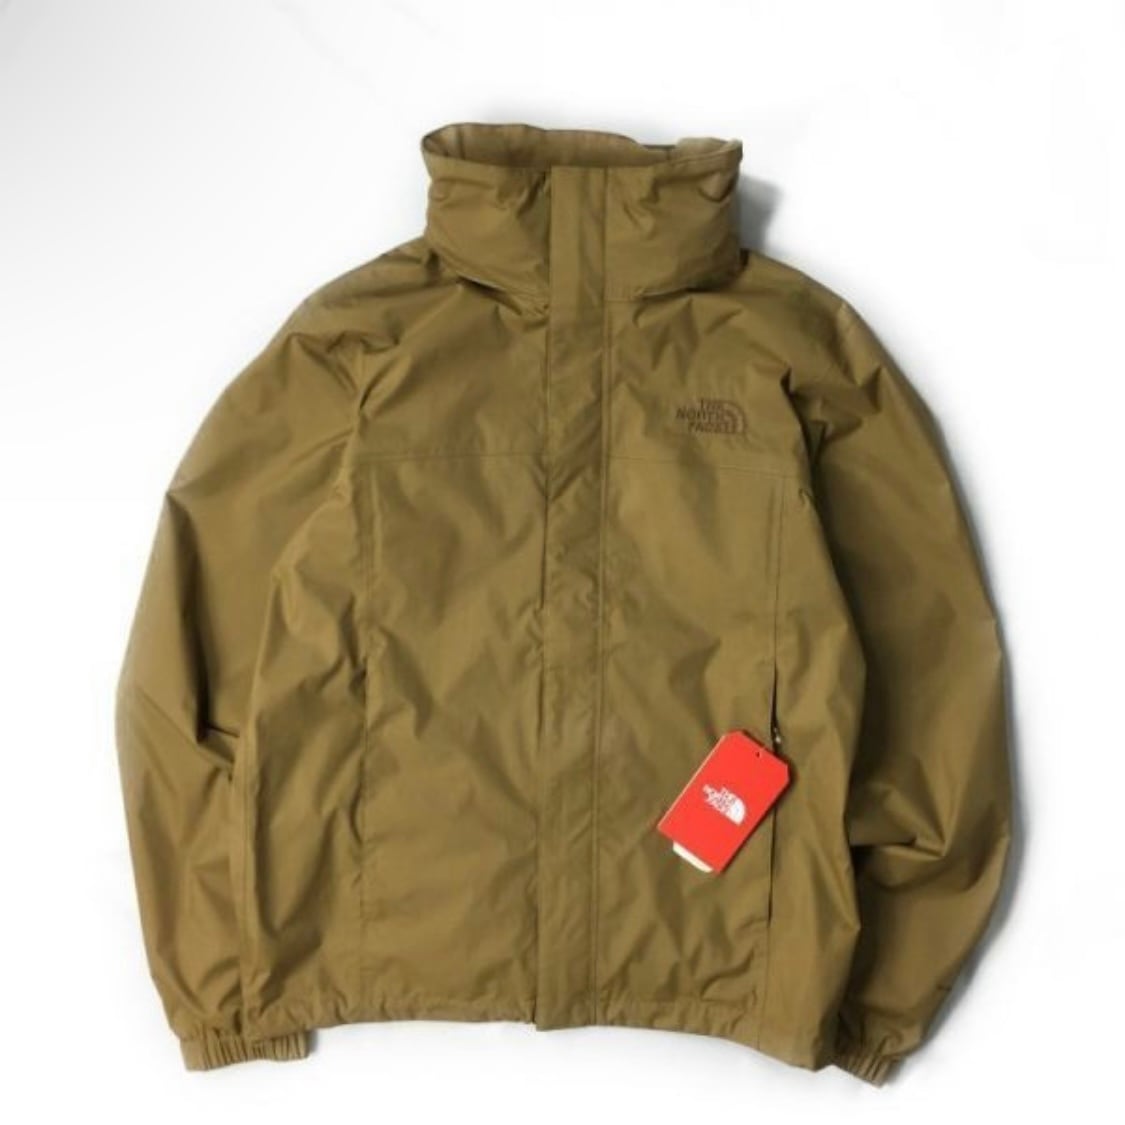 THE NORTH FACE RESOLVE 2 JACKET US限定 L